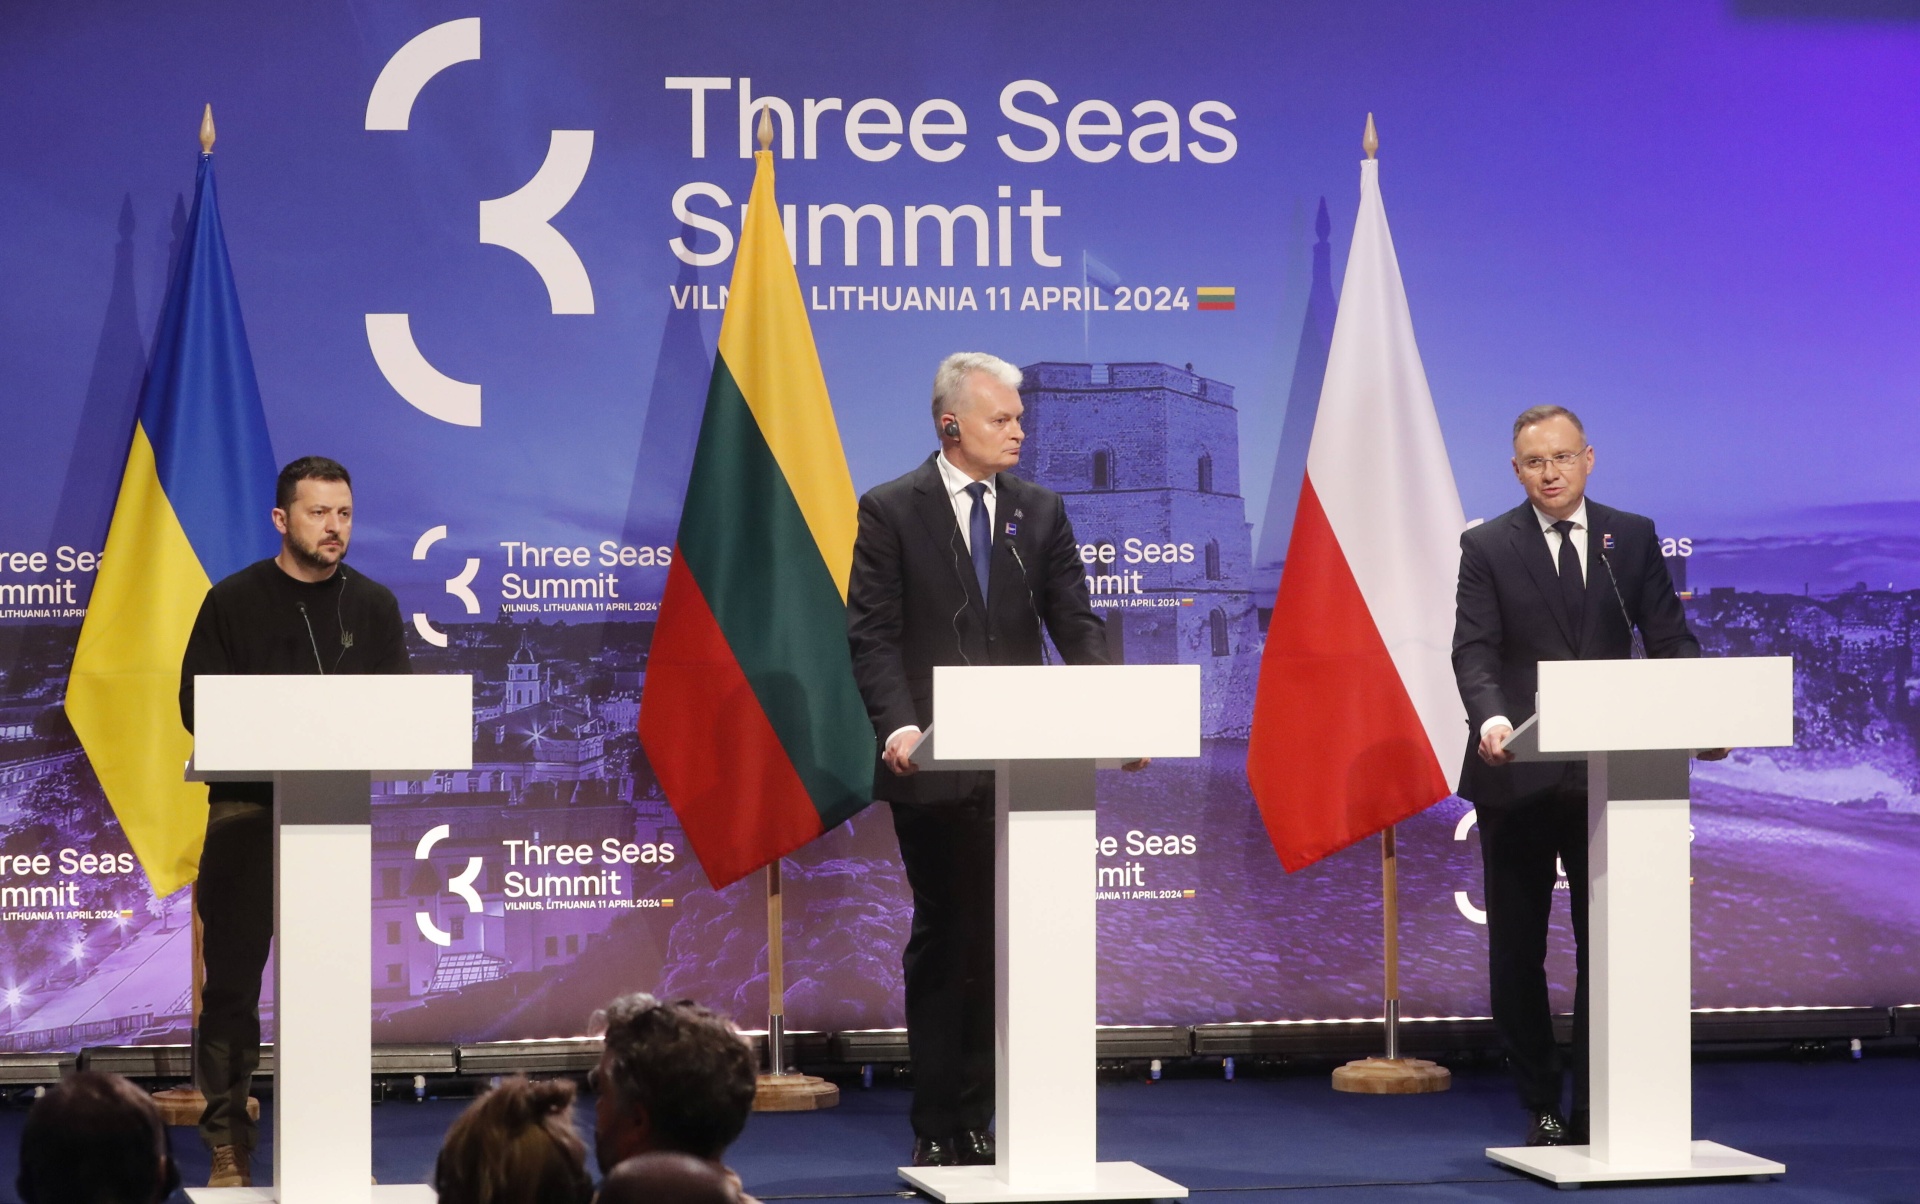 President of Poland Andrzej Duda (R), Ukrainian president Volodymyr Zelensky (L) and Lithuanian President Gitanas Nauseda attend the press conference during the Three Seas (3SI) Summit at the Palace of the Grand Dukes of Lithuania in Vilnius, Lithuania